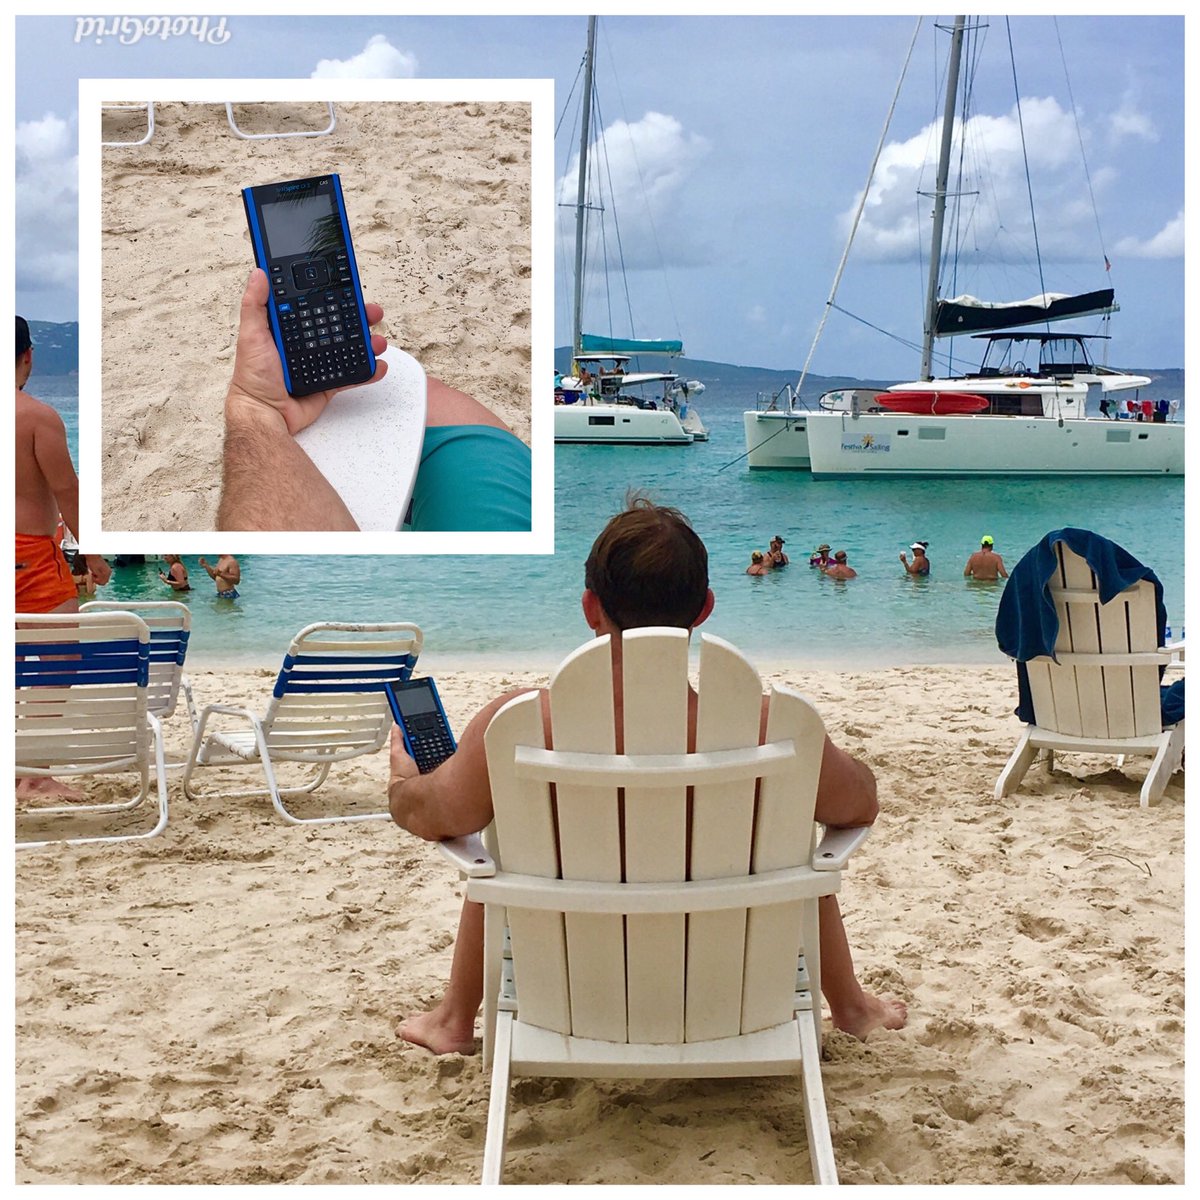 Thank you ⁦@TICalculators⁩ for the new Blue Nspire-CX II. It goes great with my latitude attitude. #t3learns #Whitebay #bvi